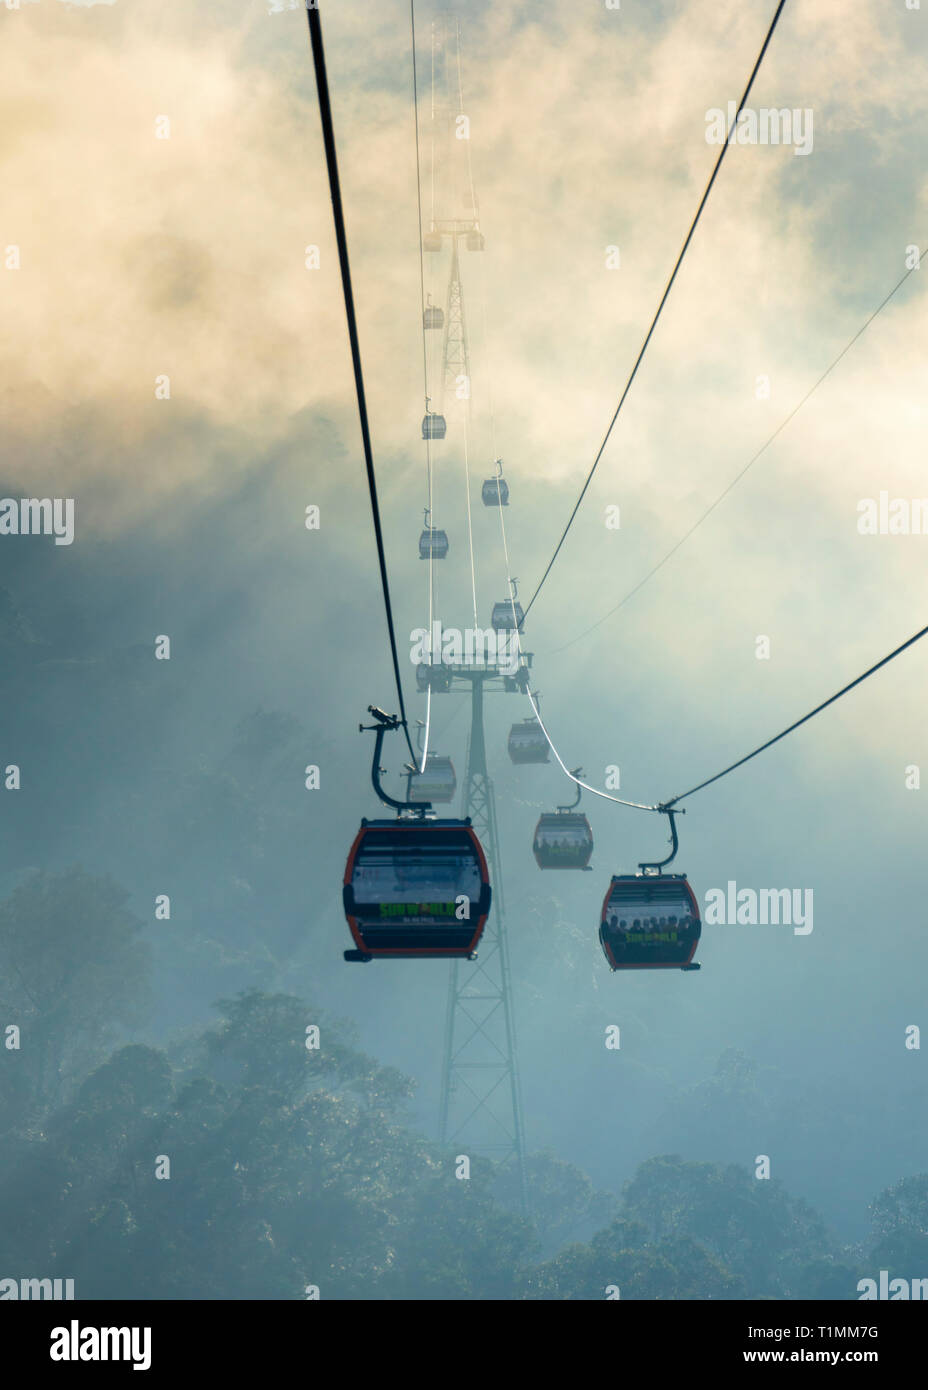 Gondola cable cars on an aerial tramway at the Ba Na Hills resort in Vietnam Stock Photo